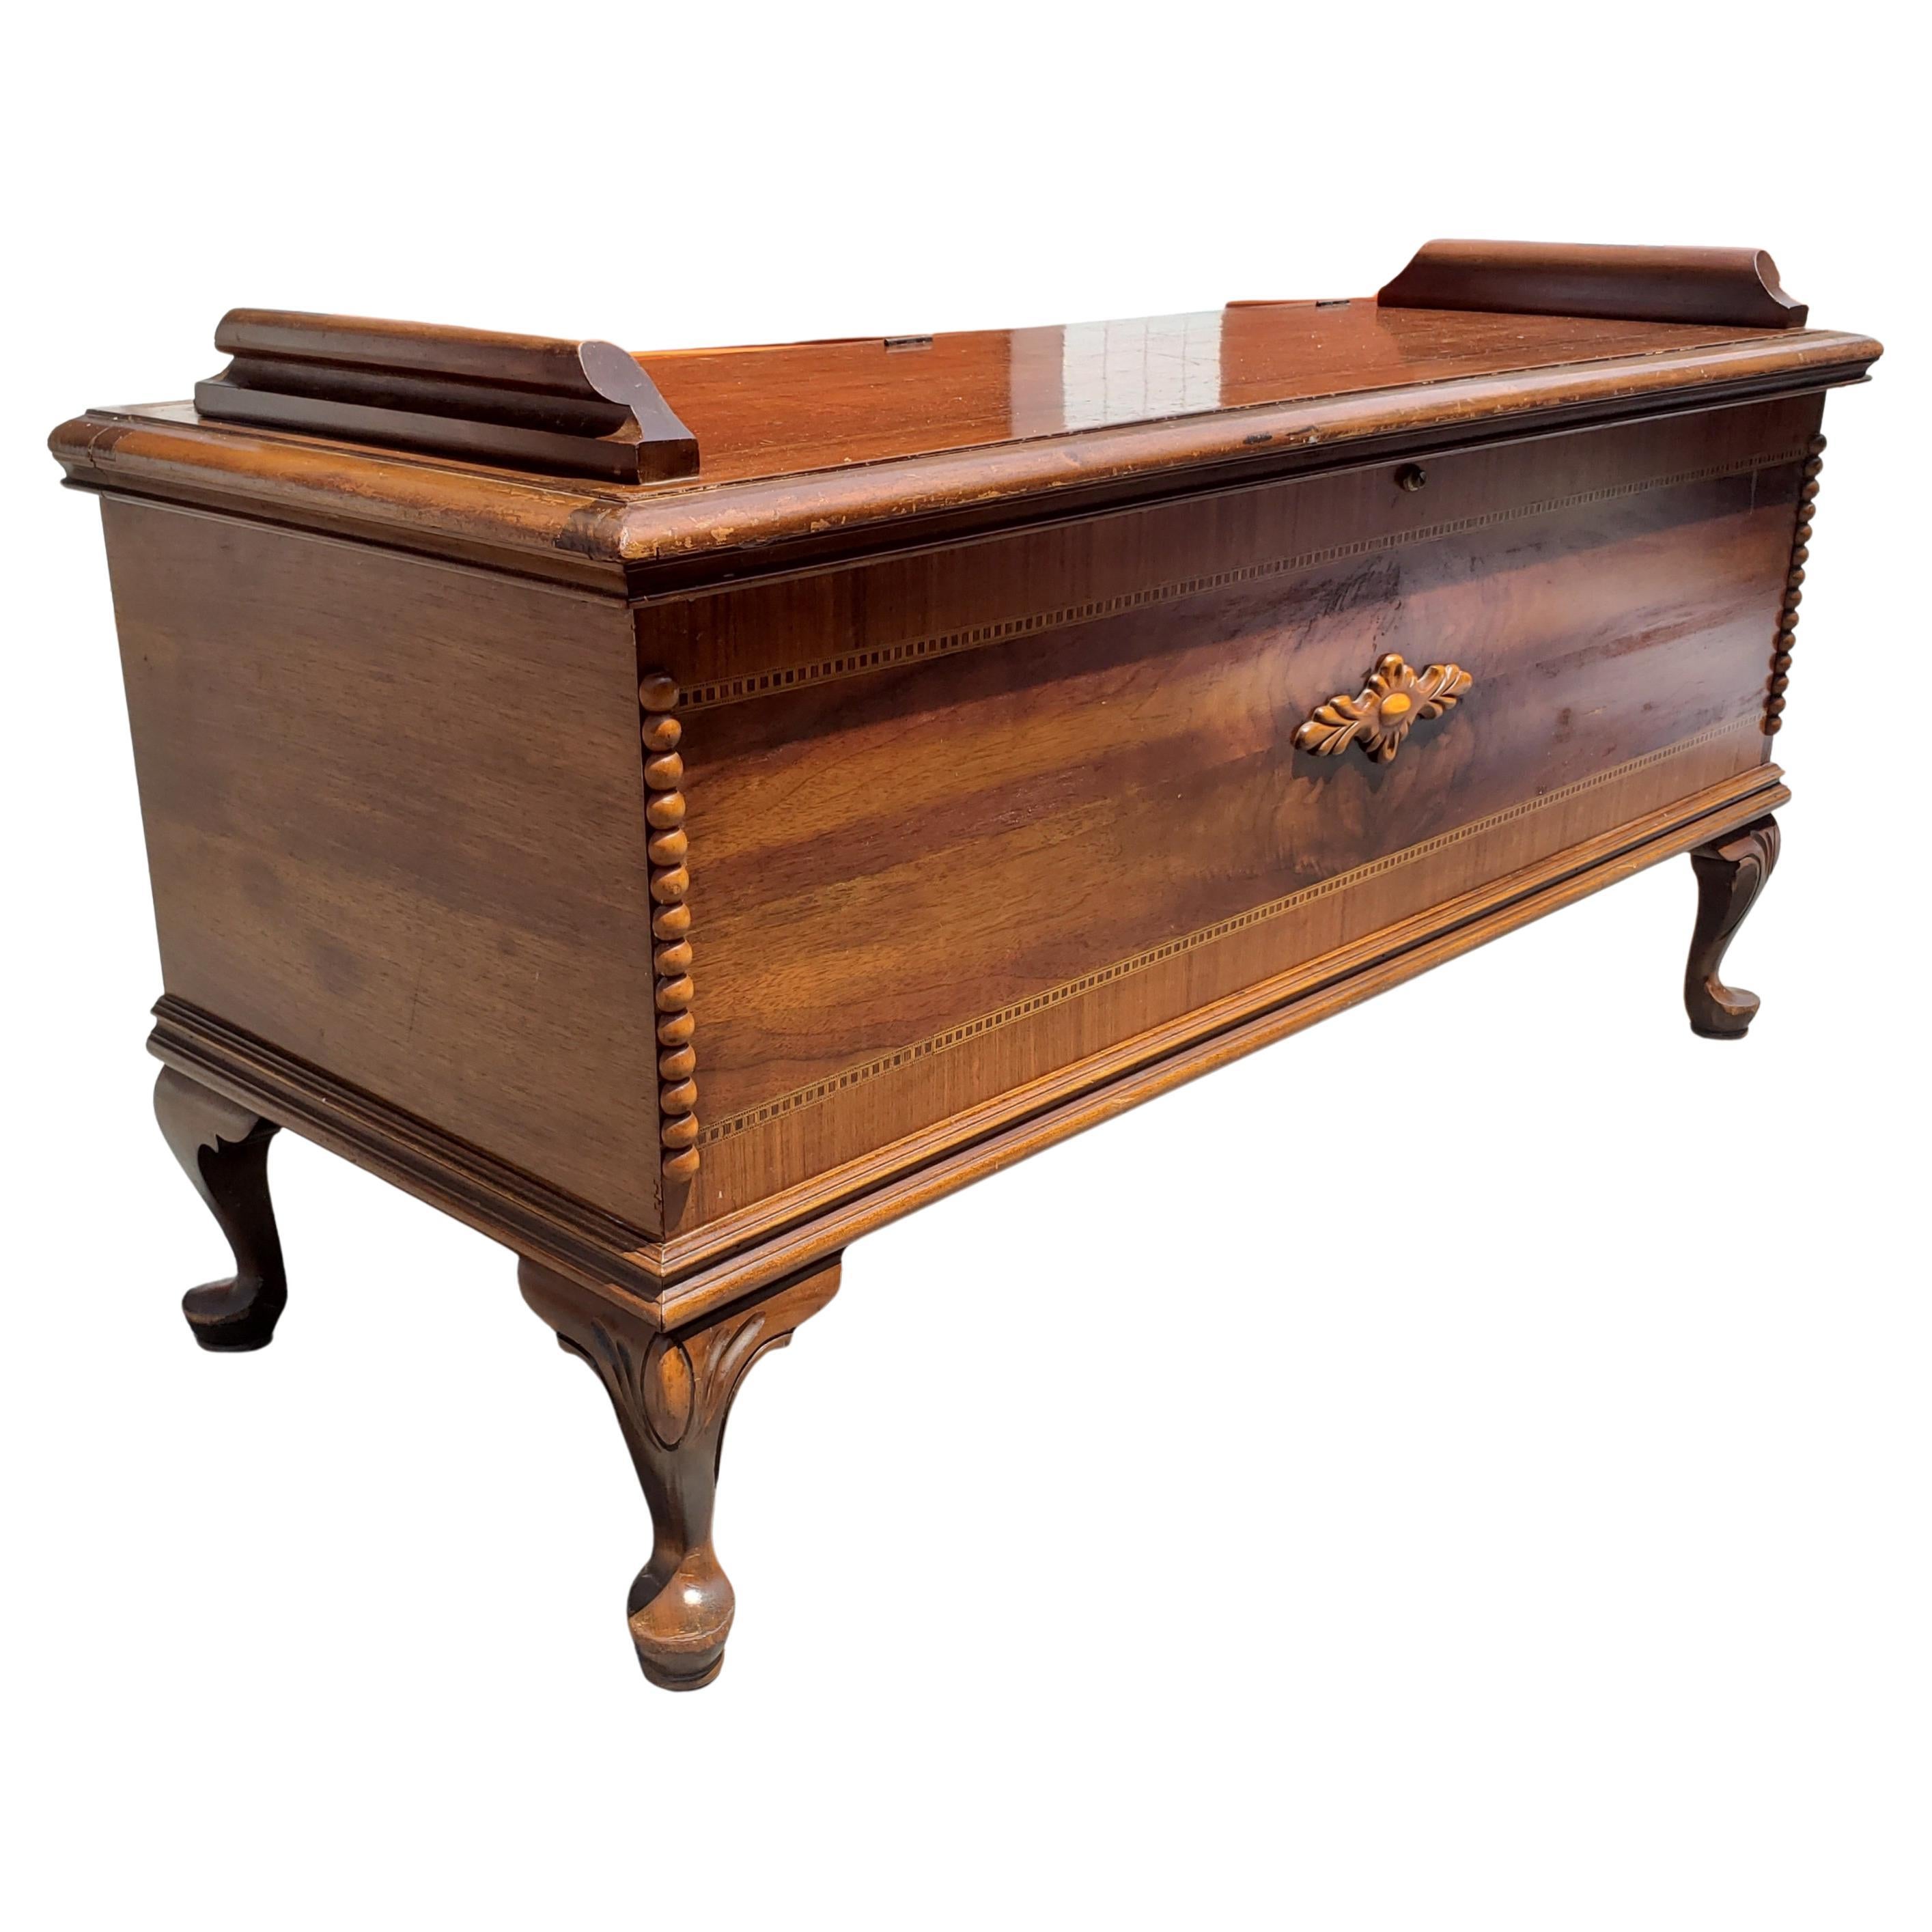 American Empire Lane Flame Mahogany with Inlays Blanket Chest with Cedar Lining